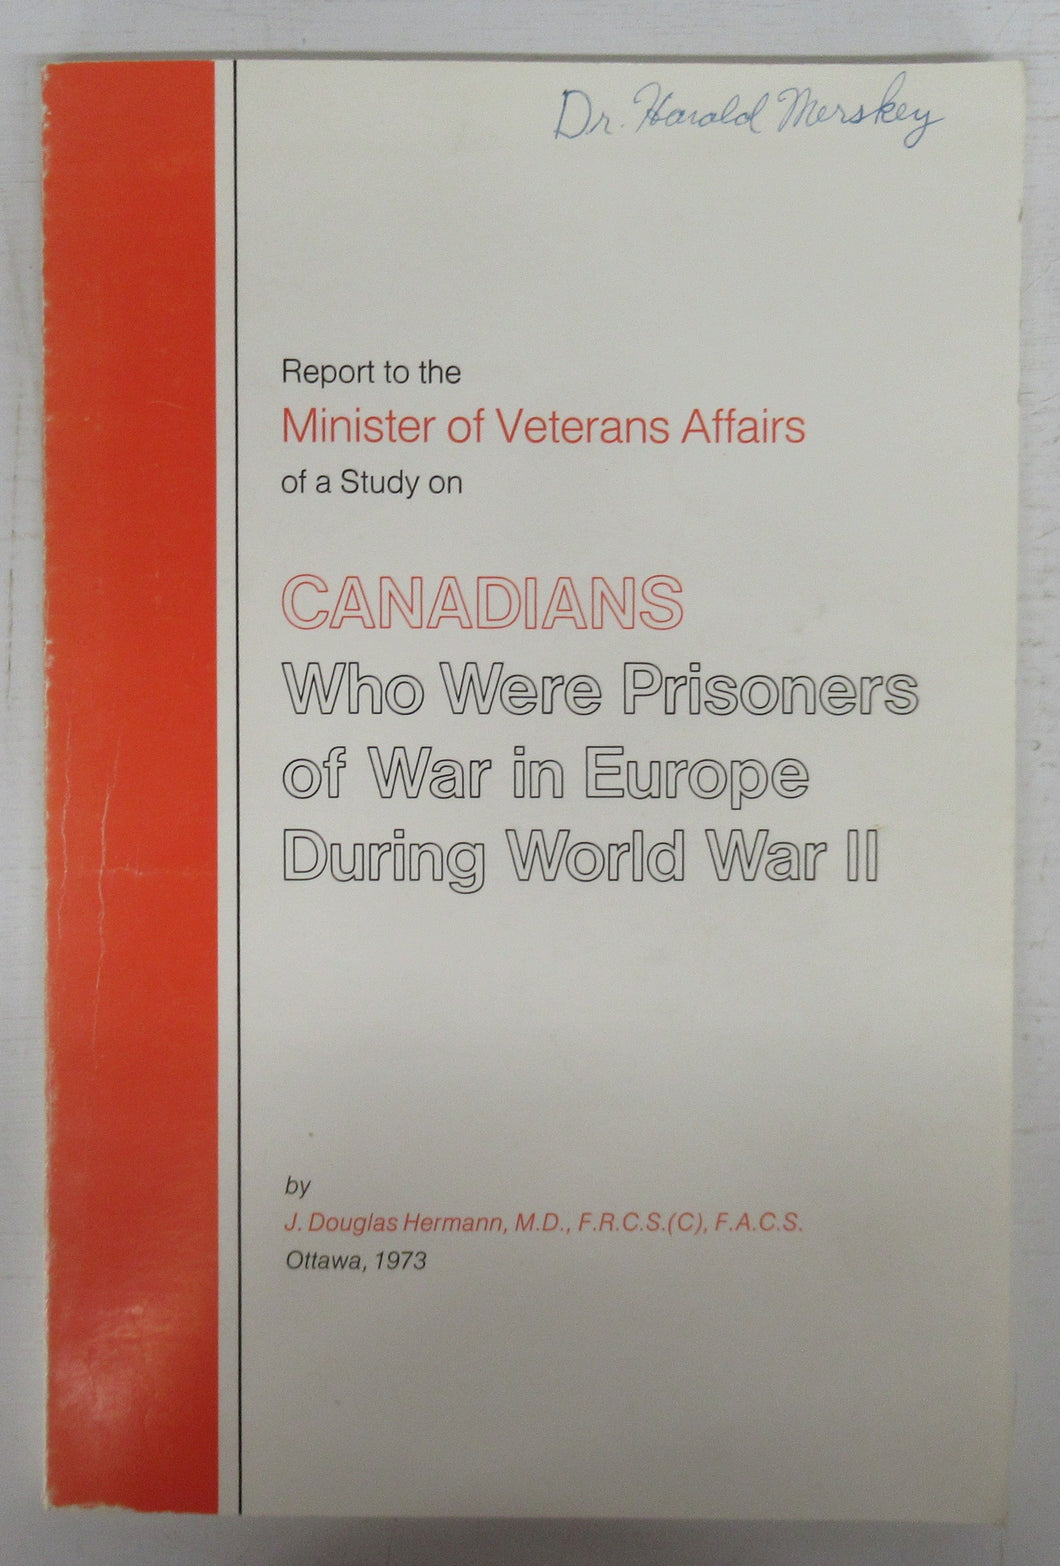 Report to the Minister of Veterans Affairs of a Study on Canadians Who Were Prisoners of War in Europe During World War II